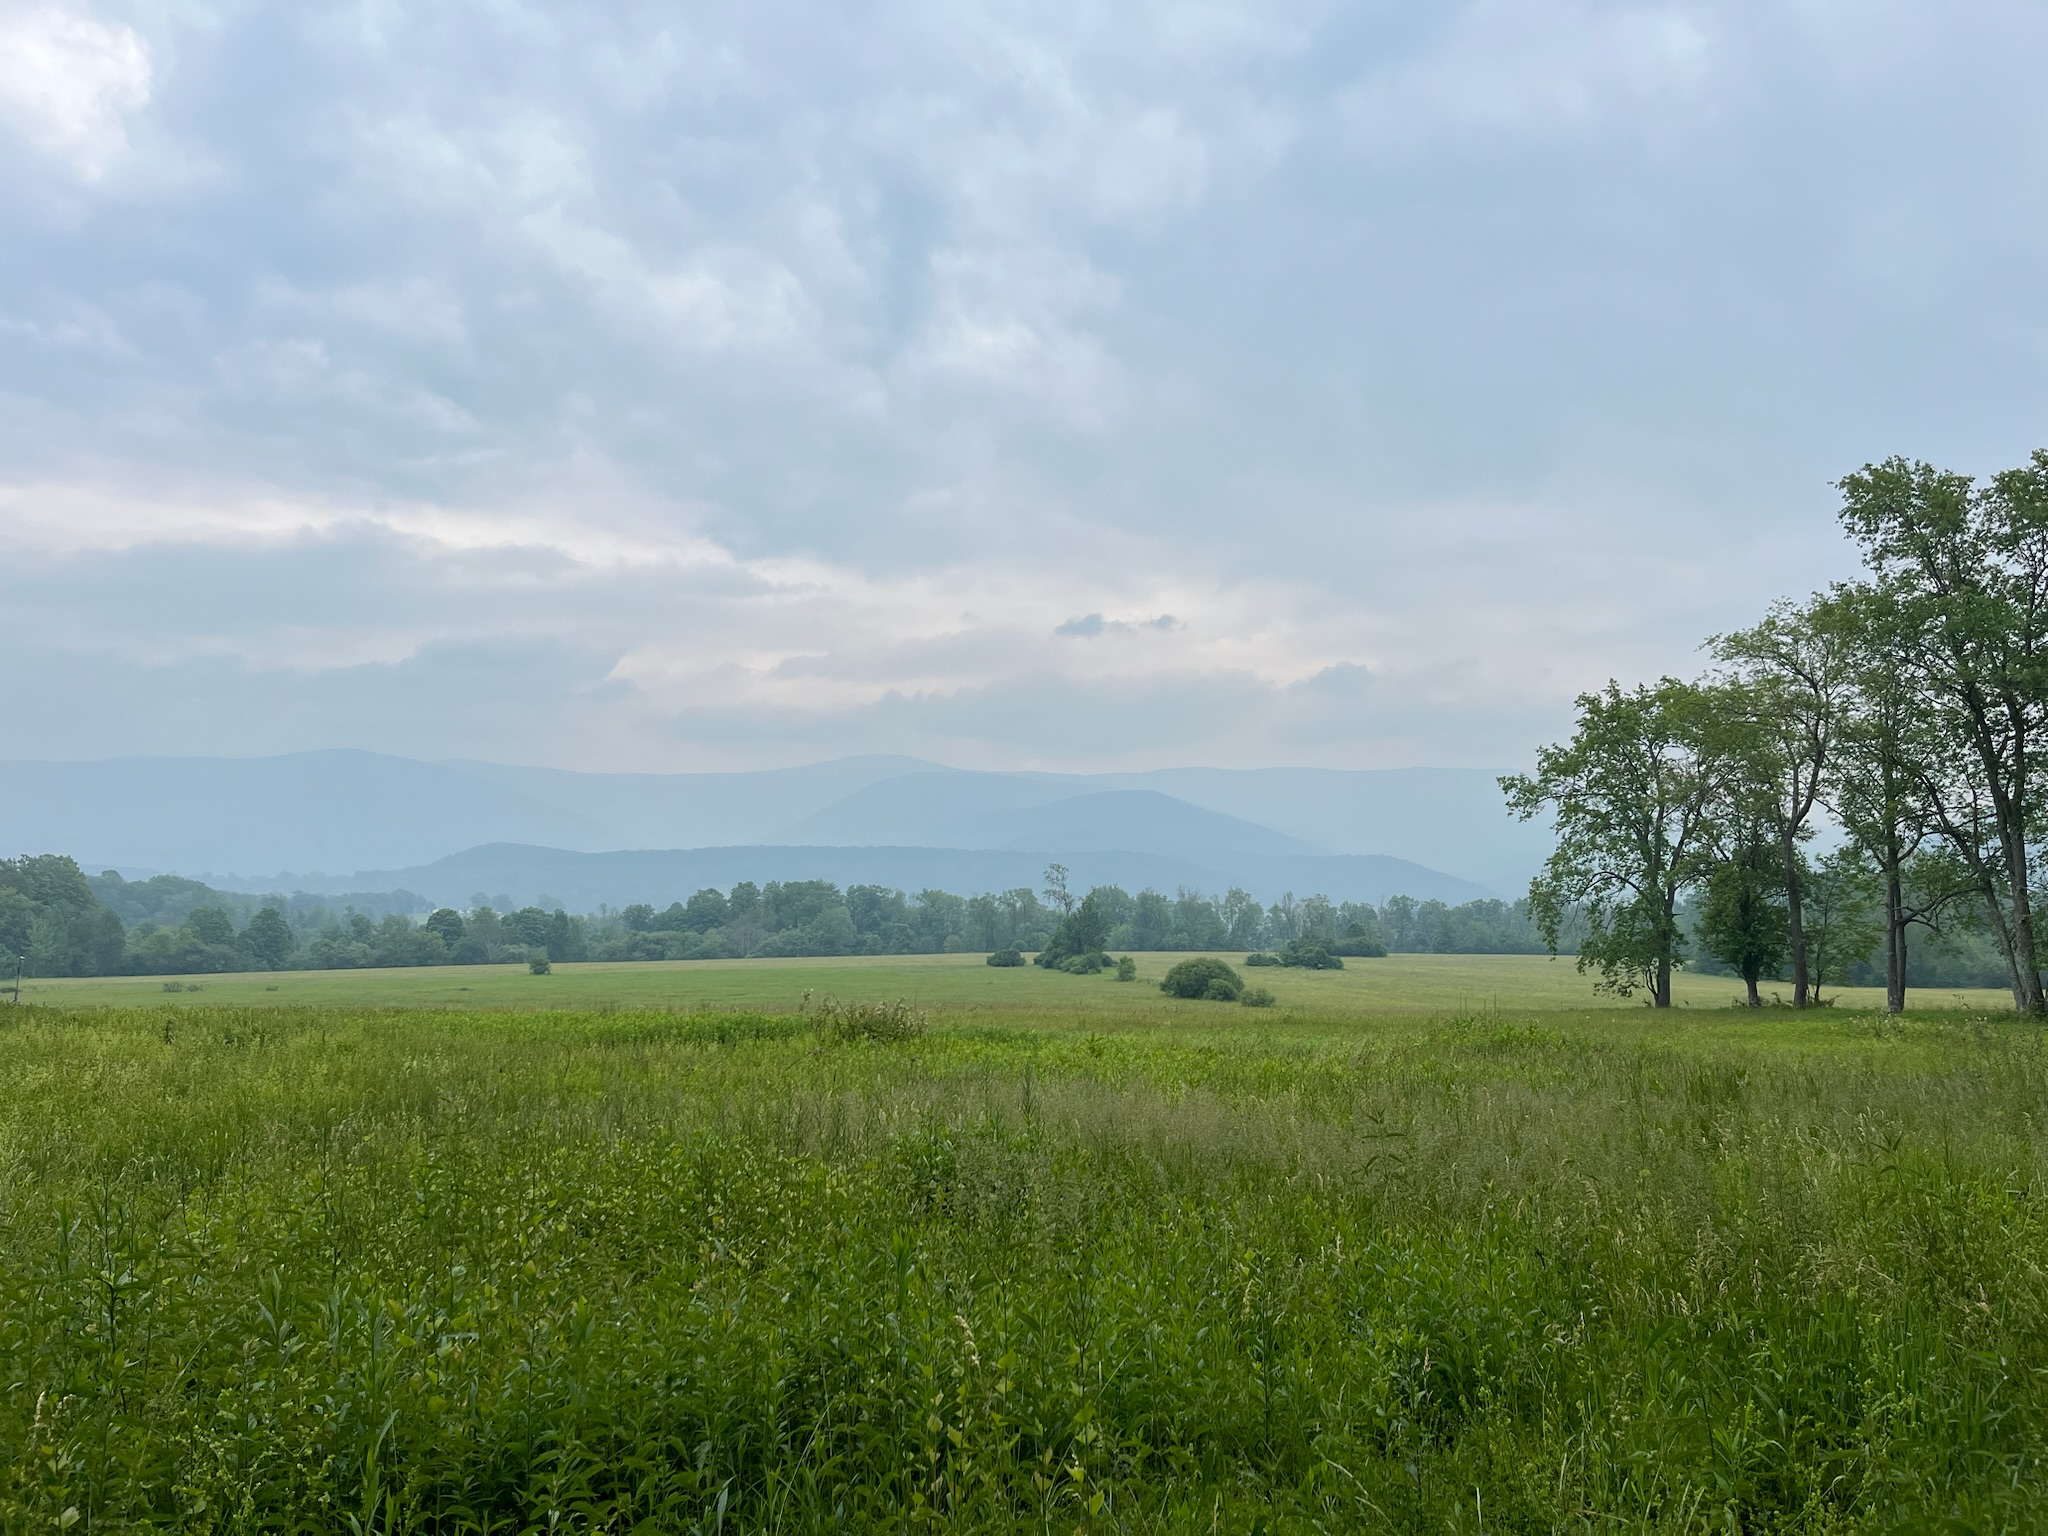 A field sprawls on a cloudy day. Three trees dot the right side of the image.